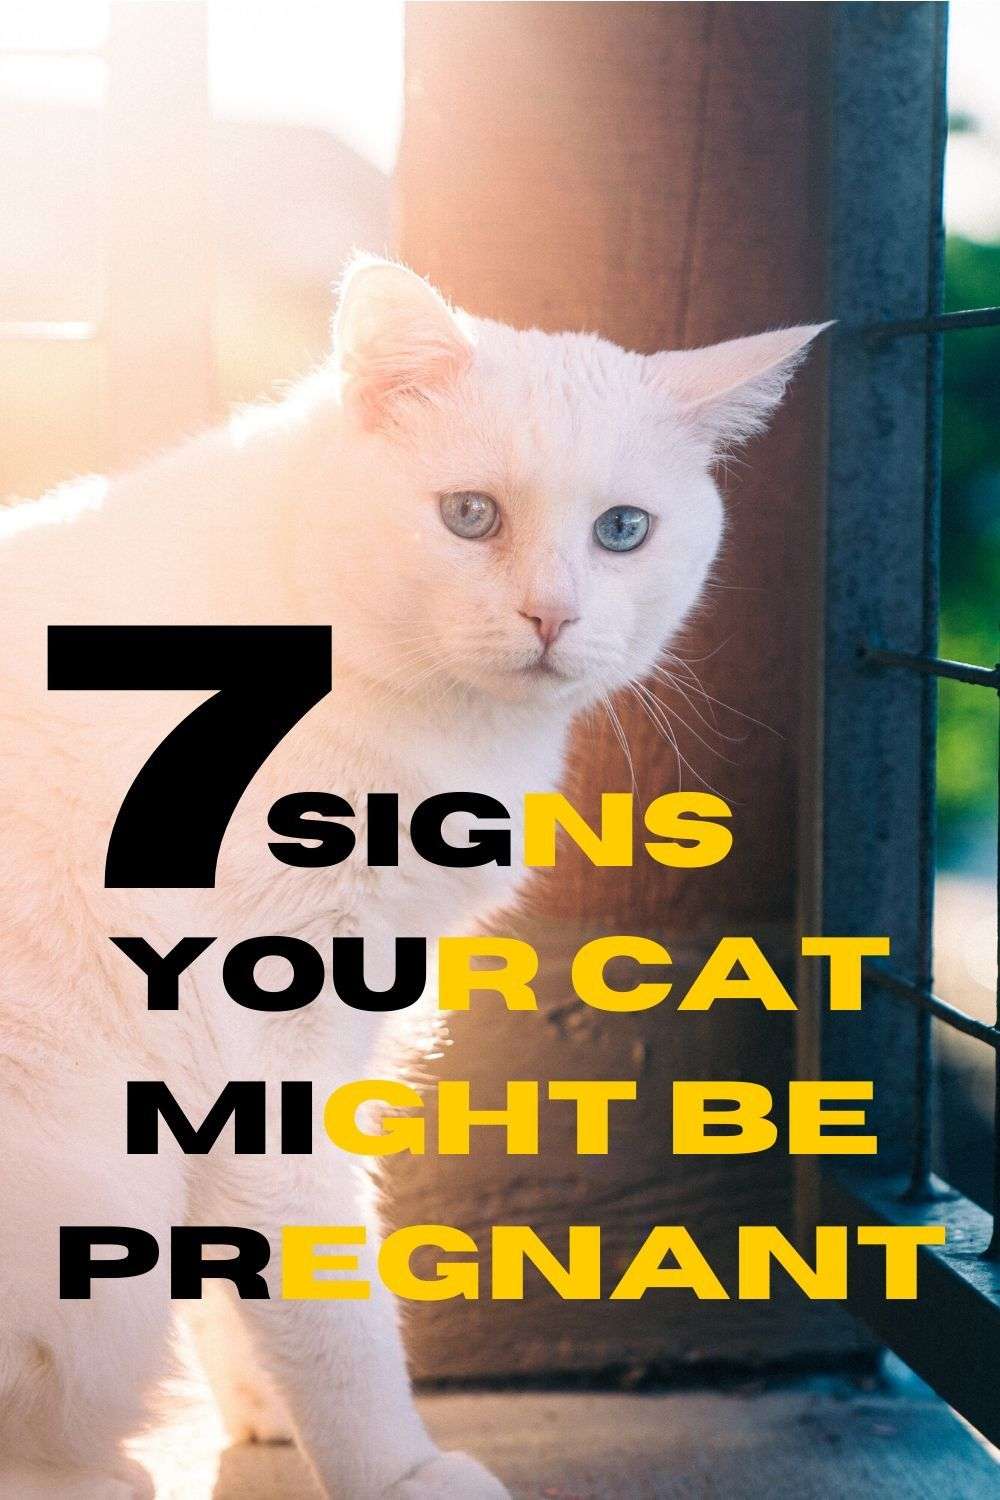 7 Signs Your Cat Might Be Pregnant